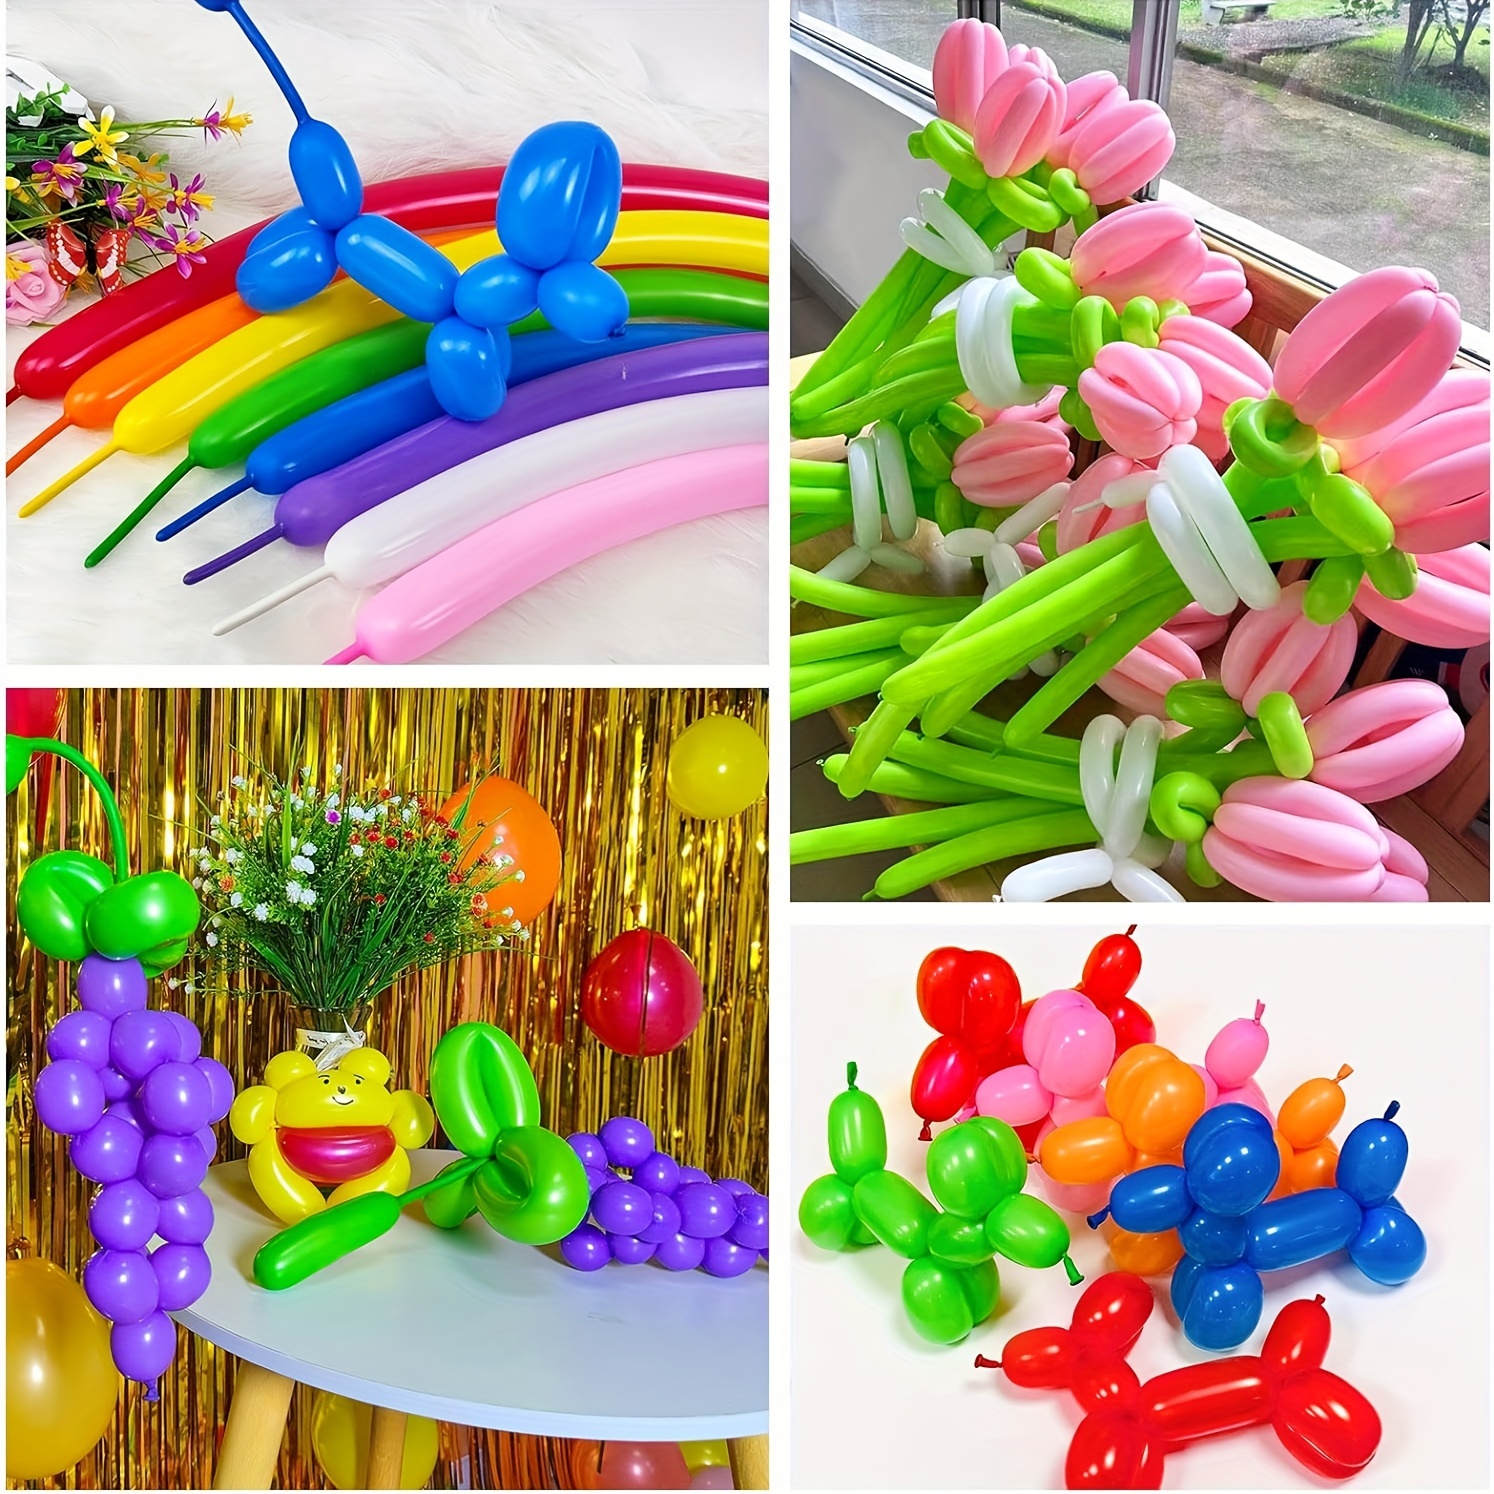 Giggly Wiggly Balloons - #themeddecor Was asked to create an